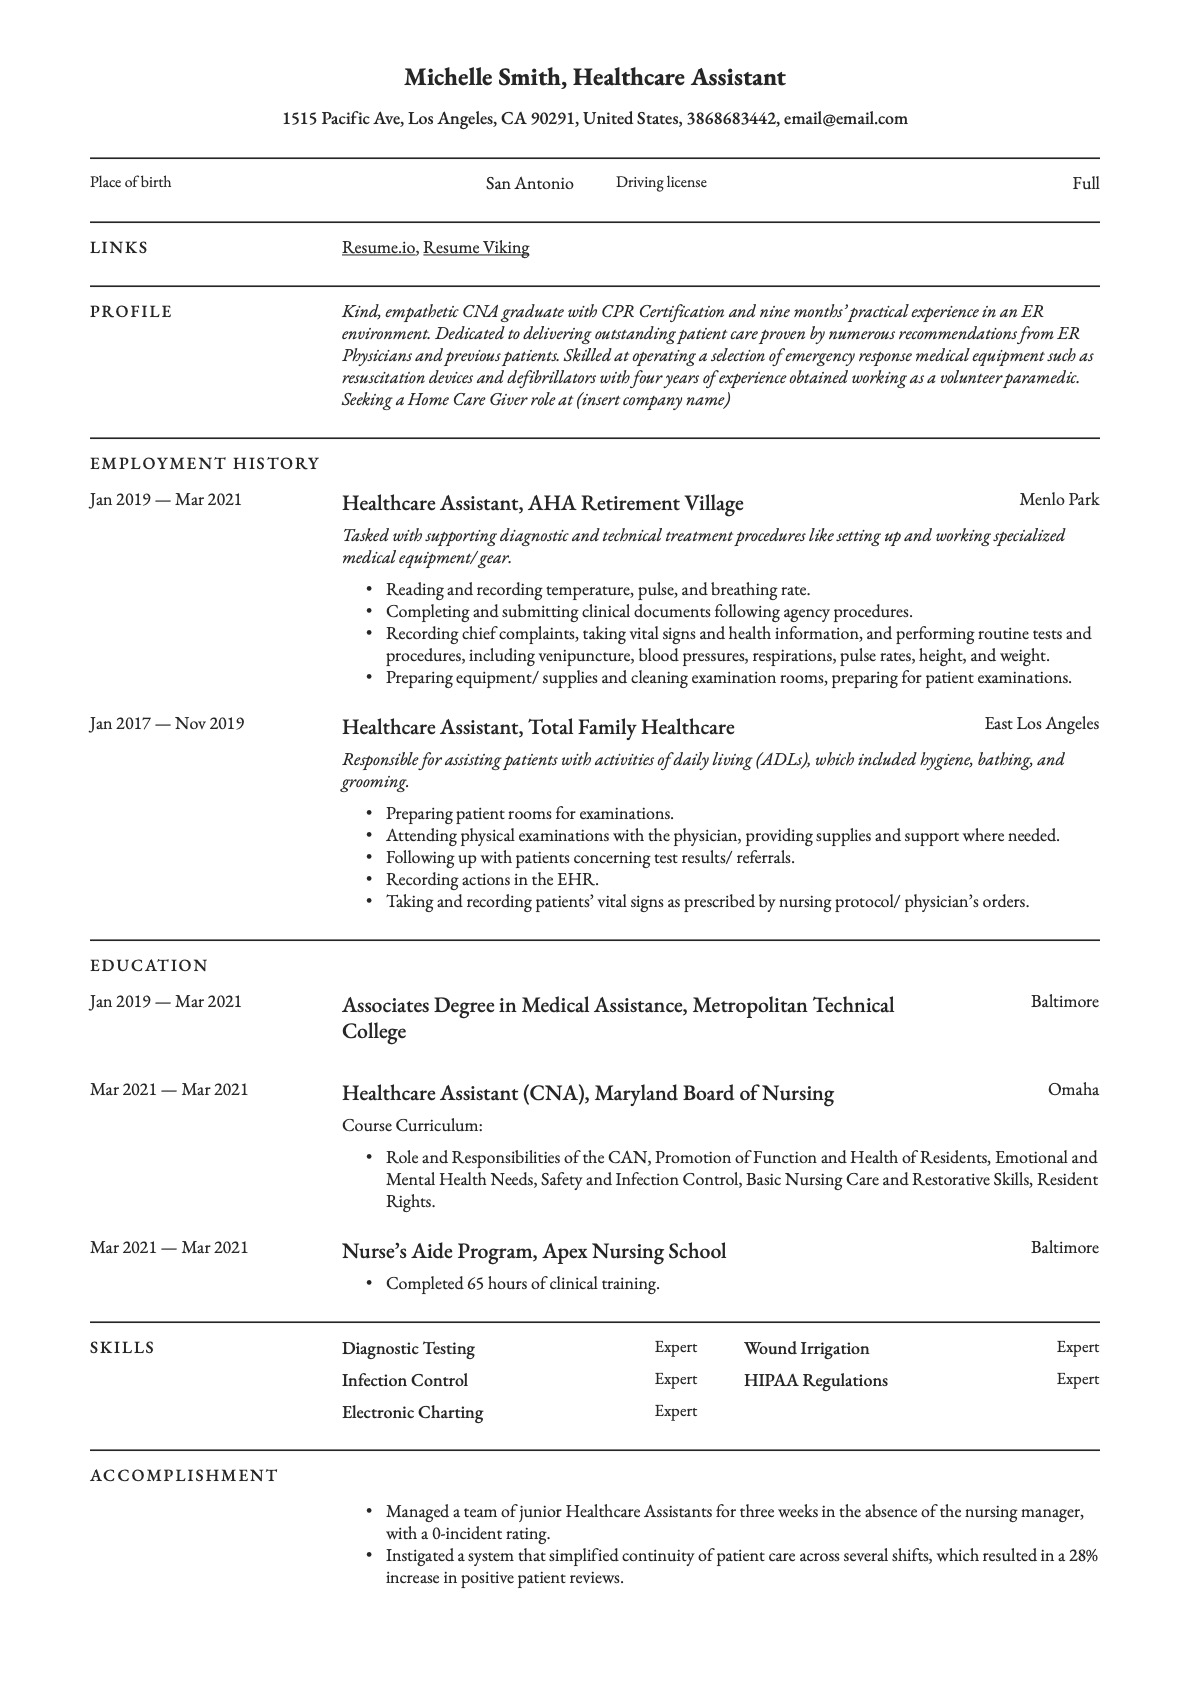 Example Resume Healthcare_Assistant-5